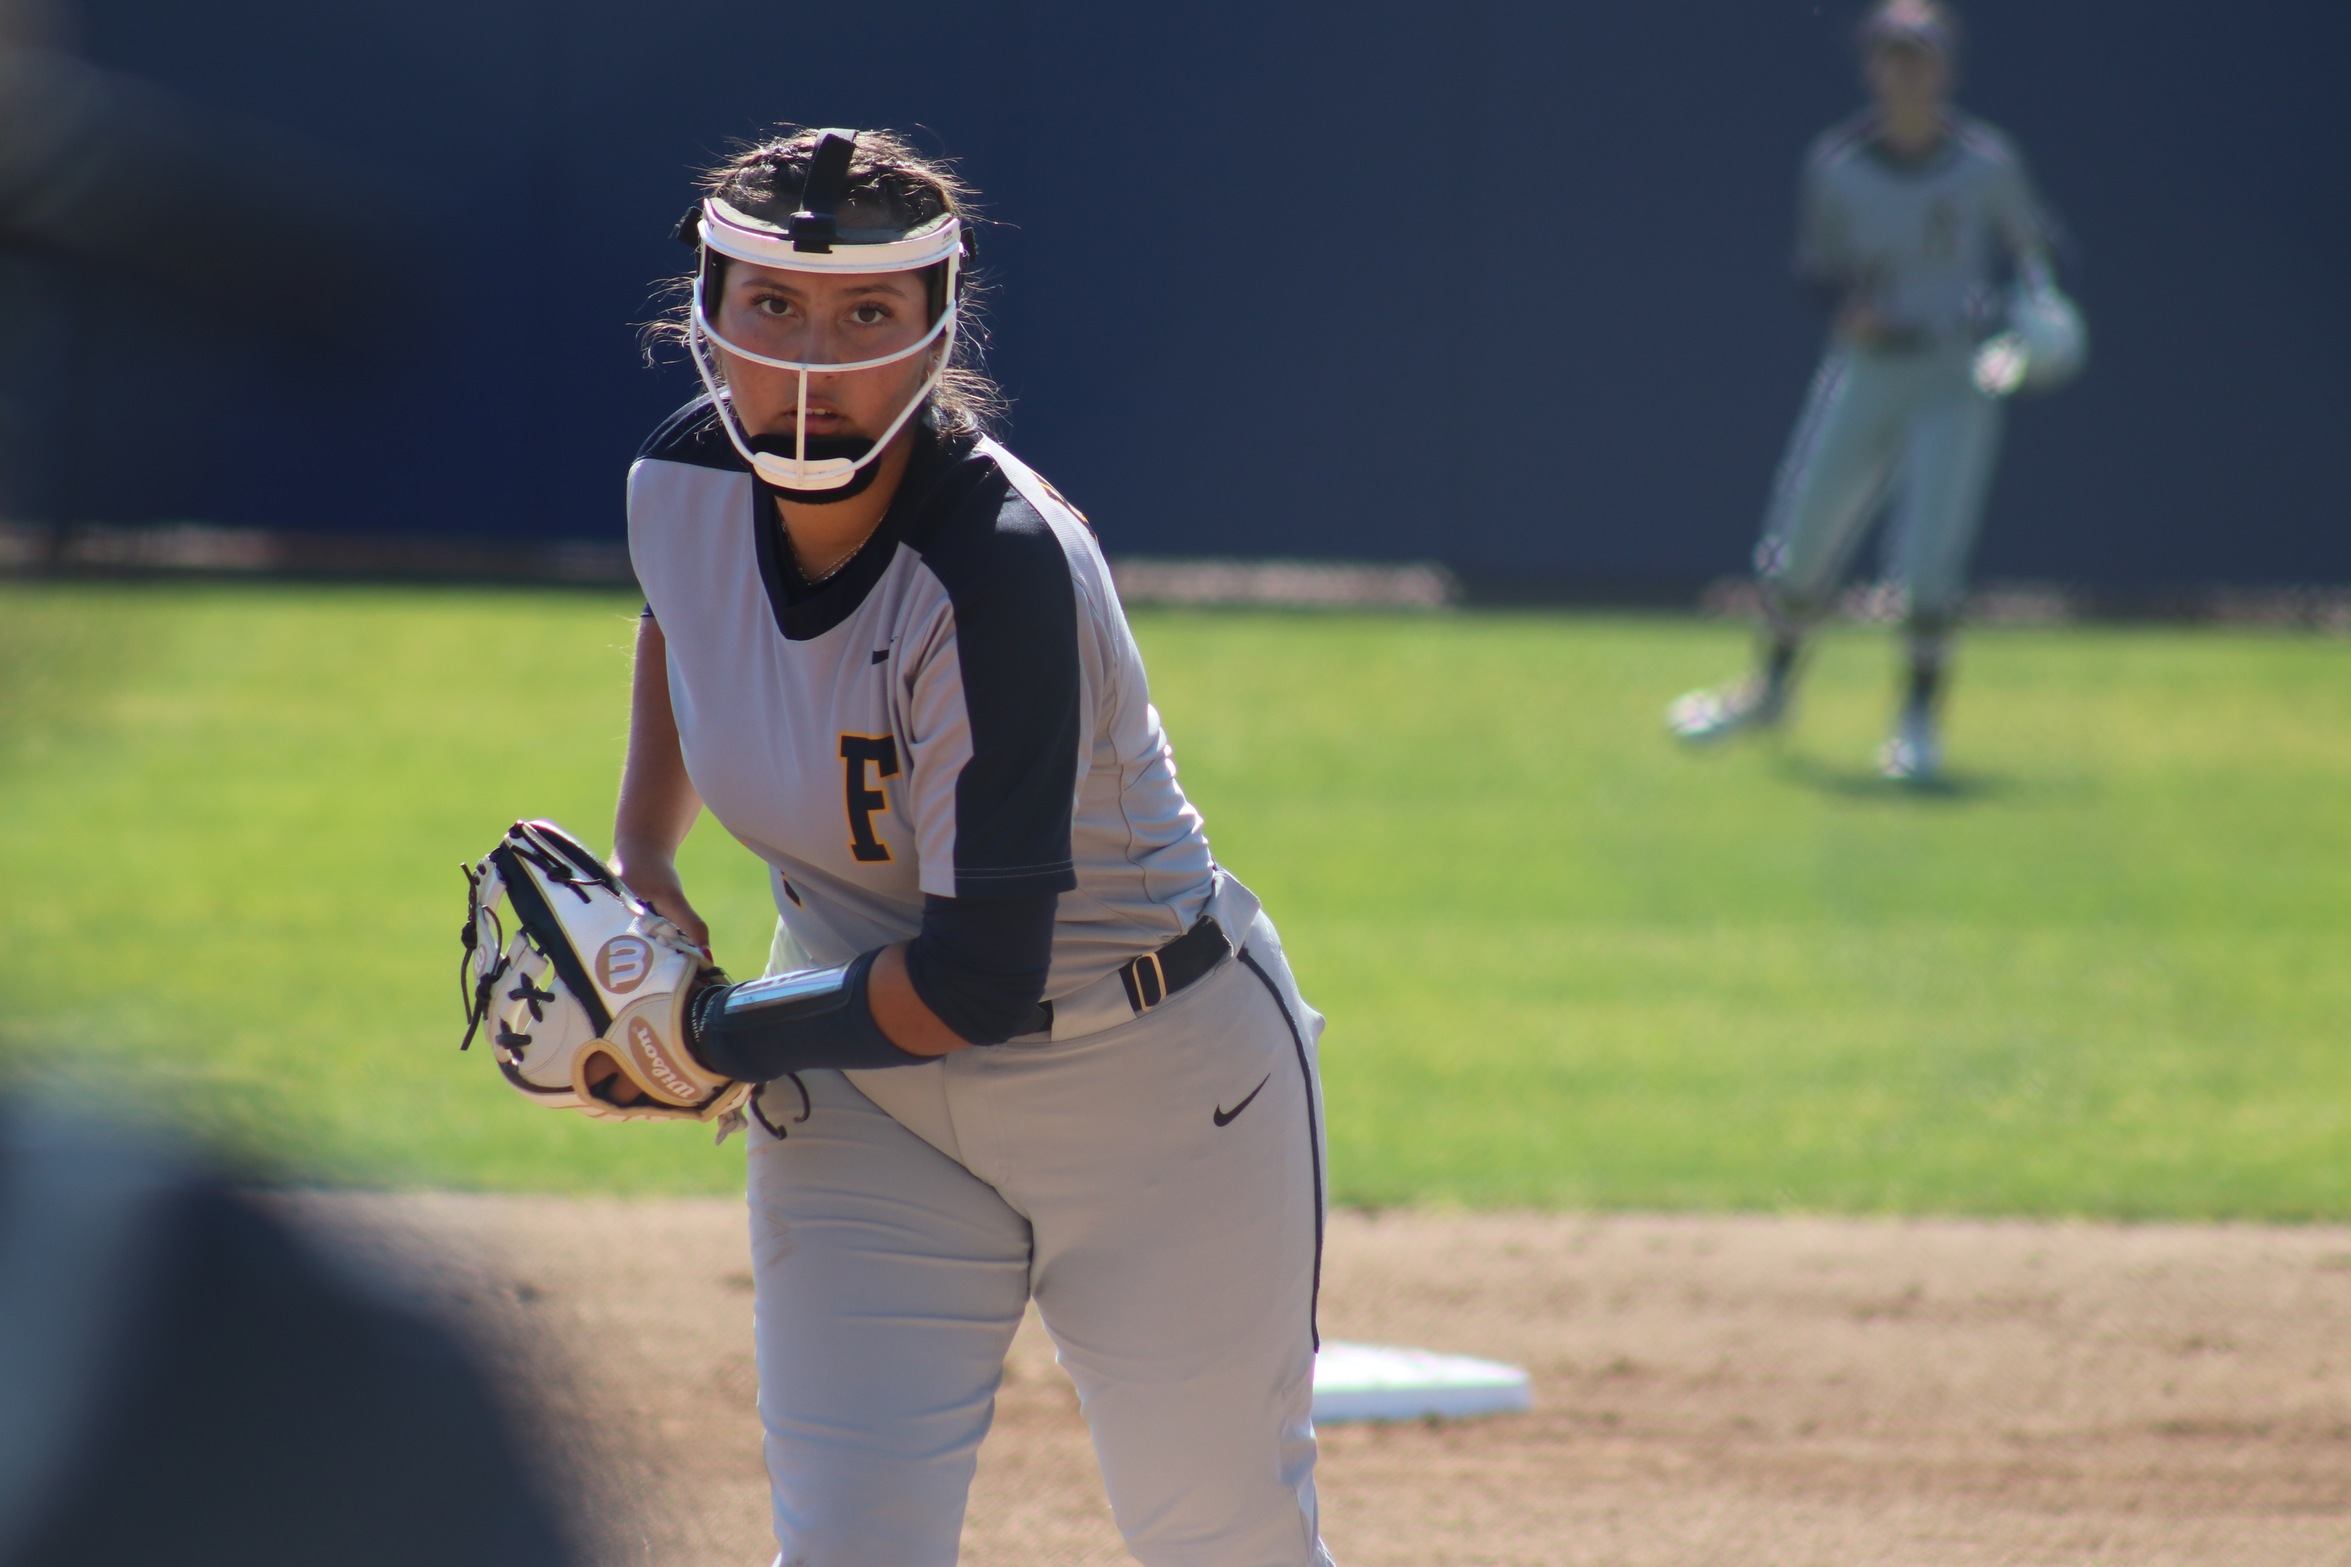 Allyson Fuentes tossed a complete game with 8 K's against Orange Coast College.